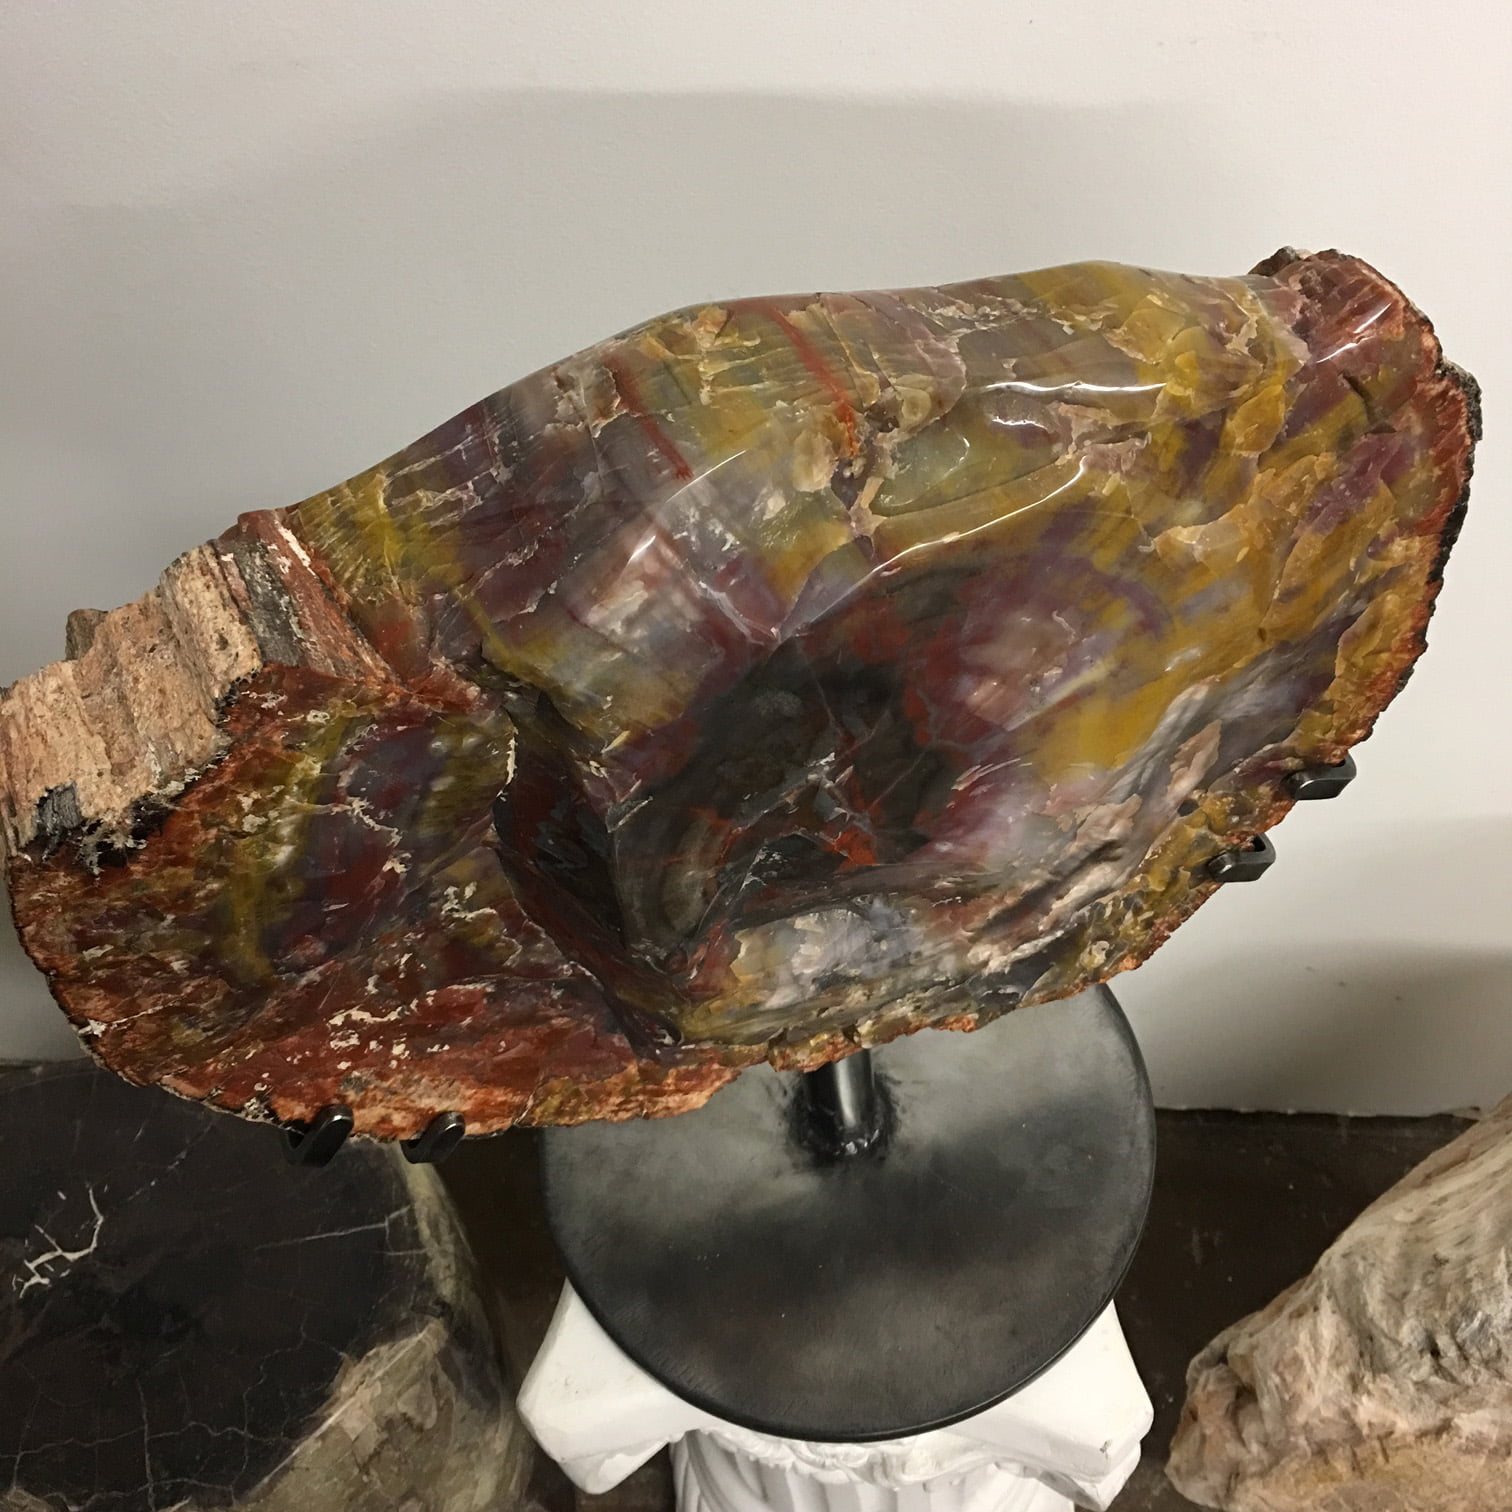 #A8 Museum Arizona Petrified Wood Sculpture Hand Polished On Both Sides - 40 Lbs Plus Rotating Stand